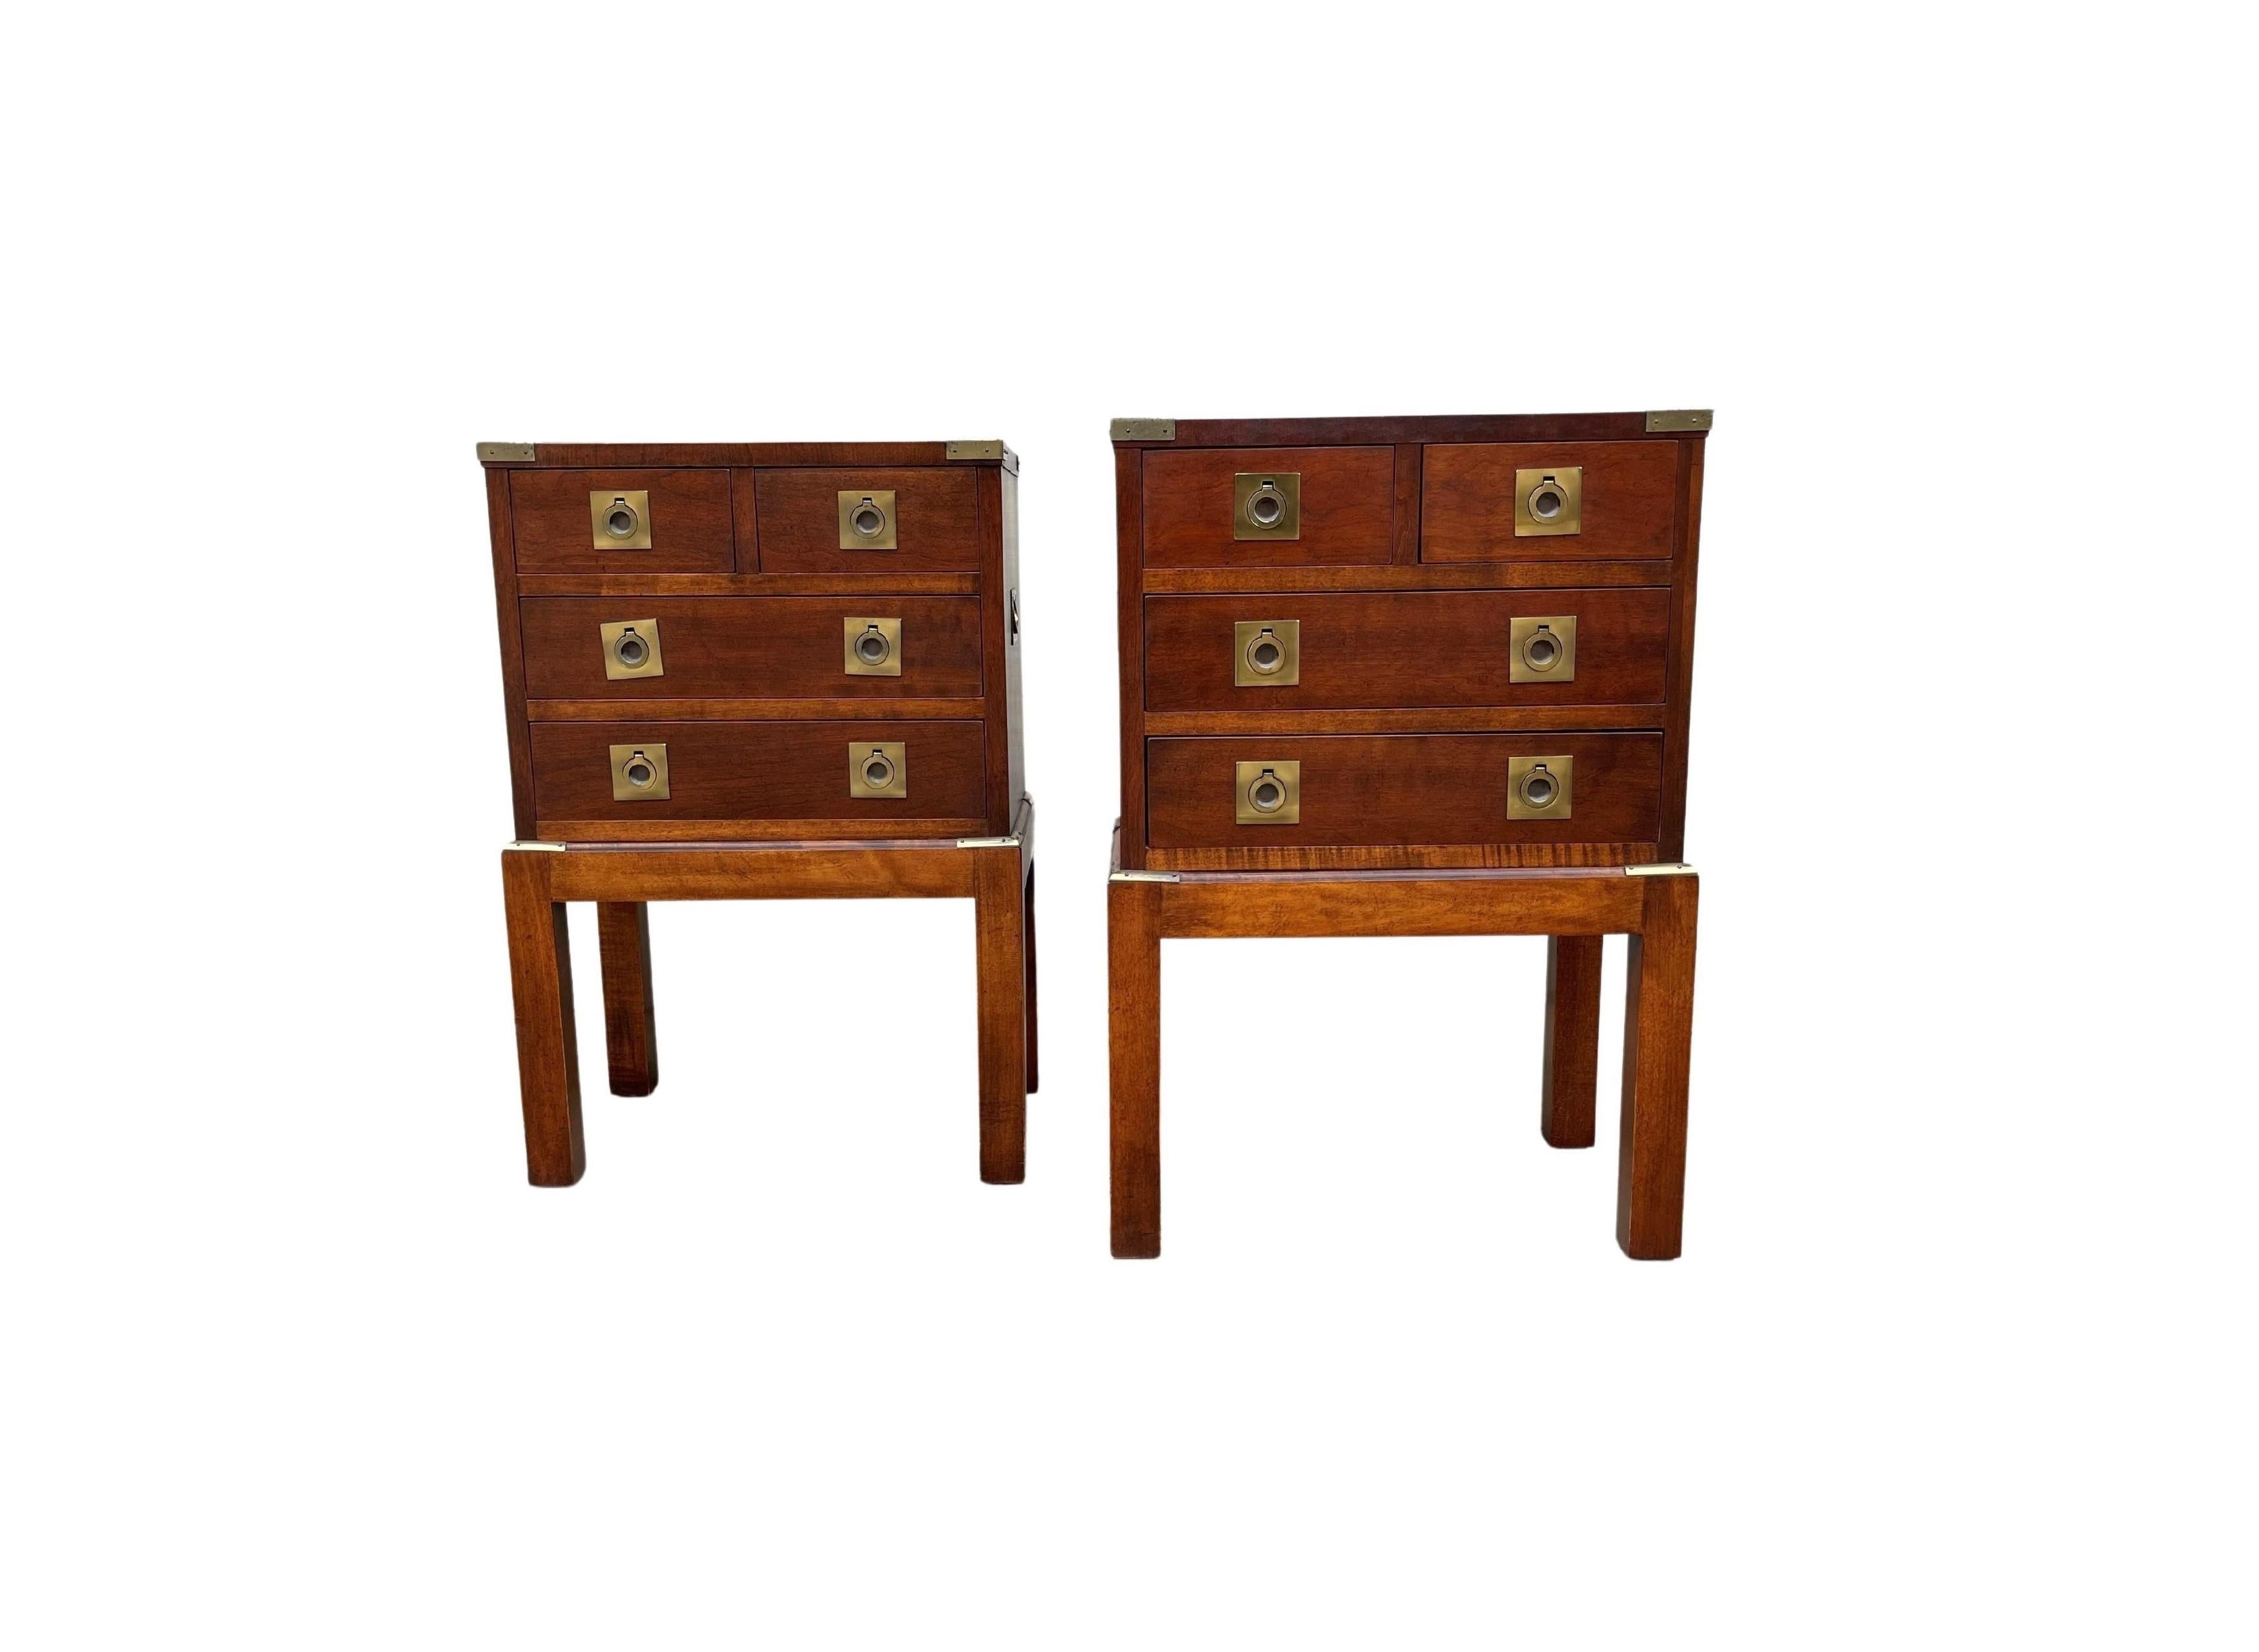 We are delighted to offer for sale this stunning pair of modern military campaign chests mounted on custom stands, circa 1970s. Incredible style, craftsmanship and attention to detail. Clean-lined campaign style silhouette, solid mahogany wood